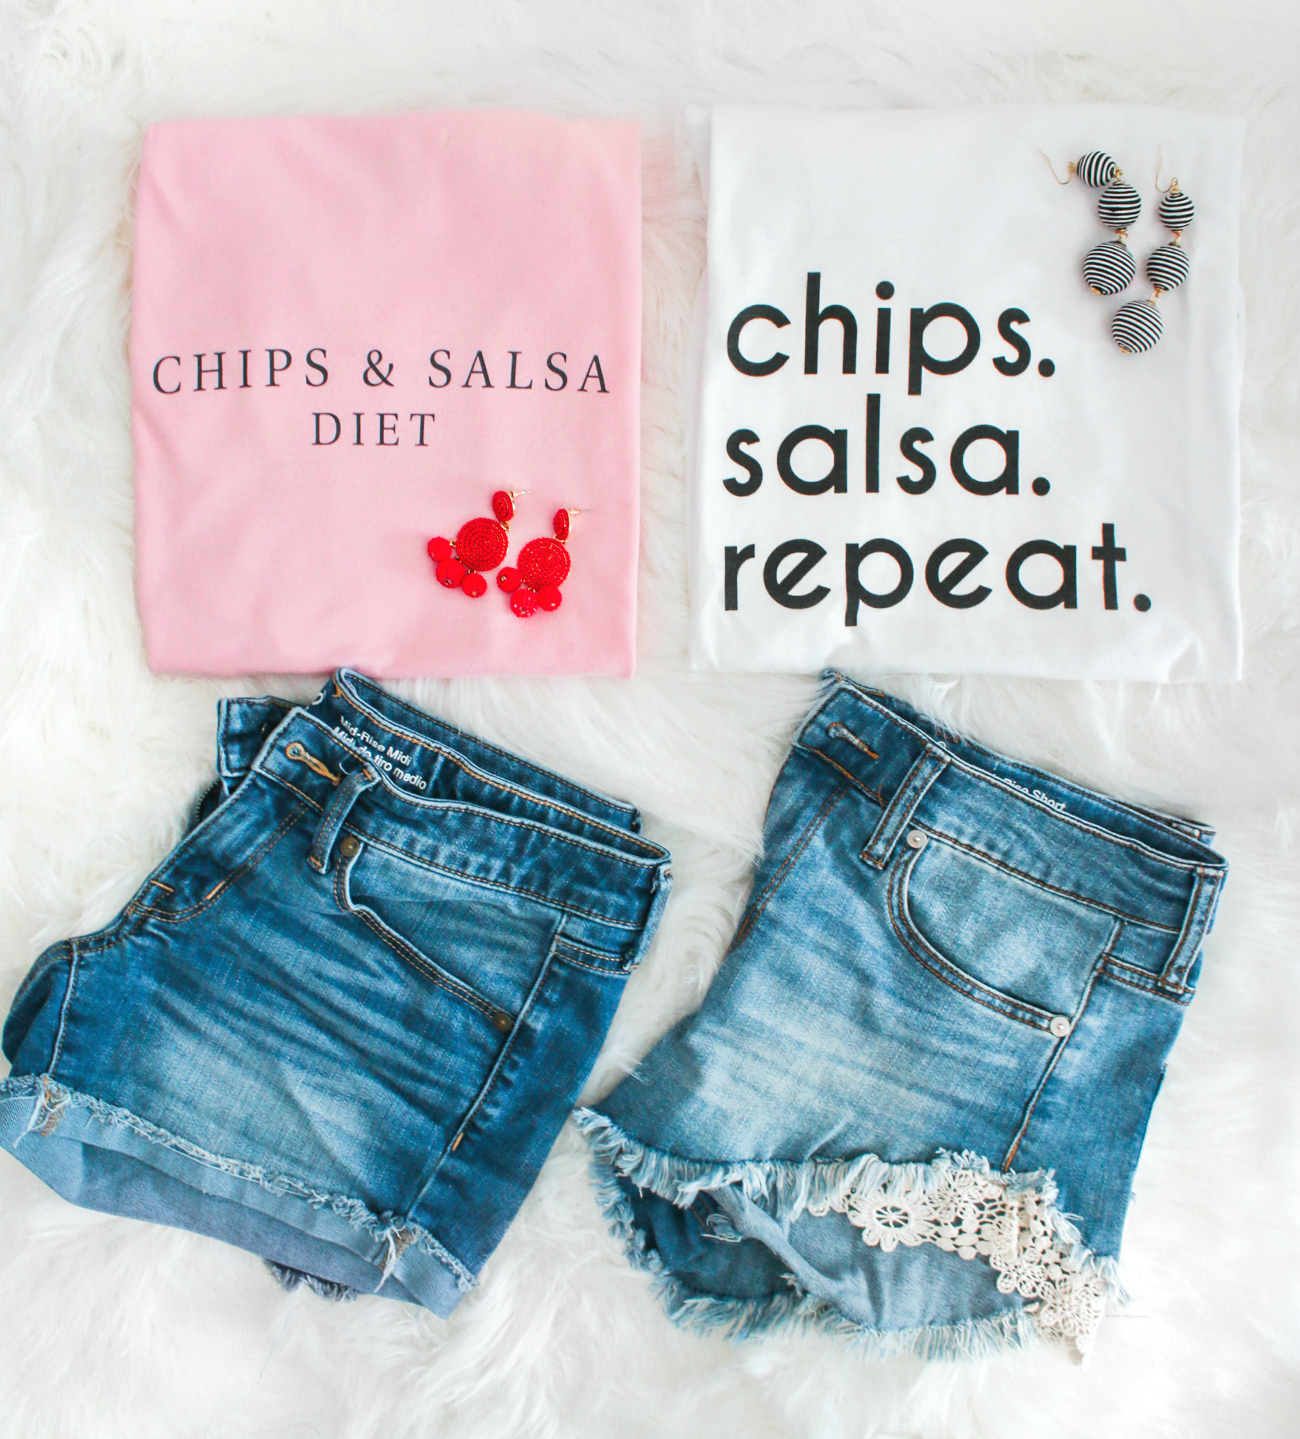 Two Quick Fresh Salsa Recipes for Your Cinco de Mayo Fiesta by southern lifestyle blogger Stephanie Ziajka from Diary of a Debutante, Chips and Salsa Diet tee, Chips Salsa Repeat tee, casual Cinco de Mayo outfit idea, strawberry jalapeno salsa recipe, strawberry and jalapeno salsa recipe, homemade salsa recipe